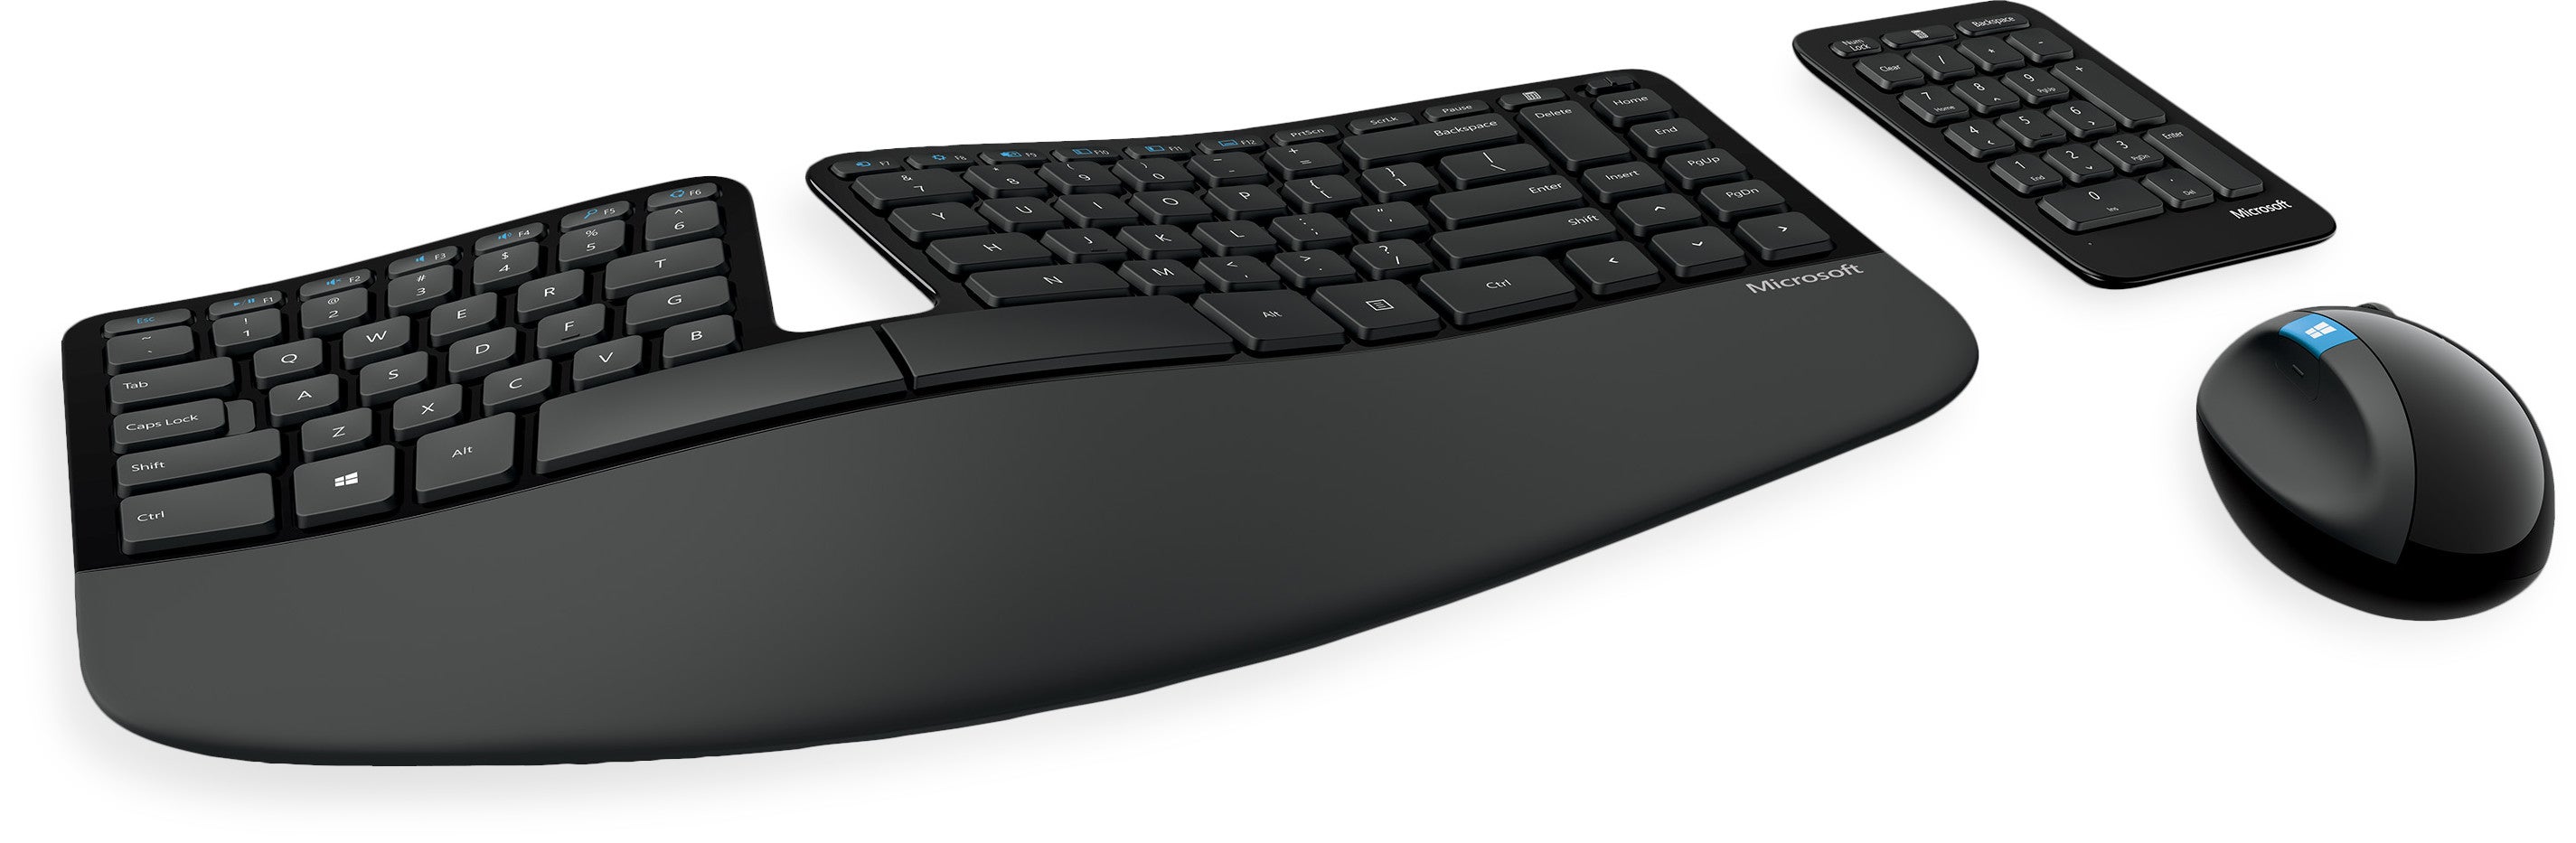 The Microsoft Sculpt keyboard and mouse.